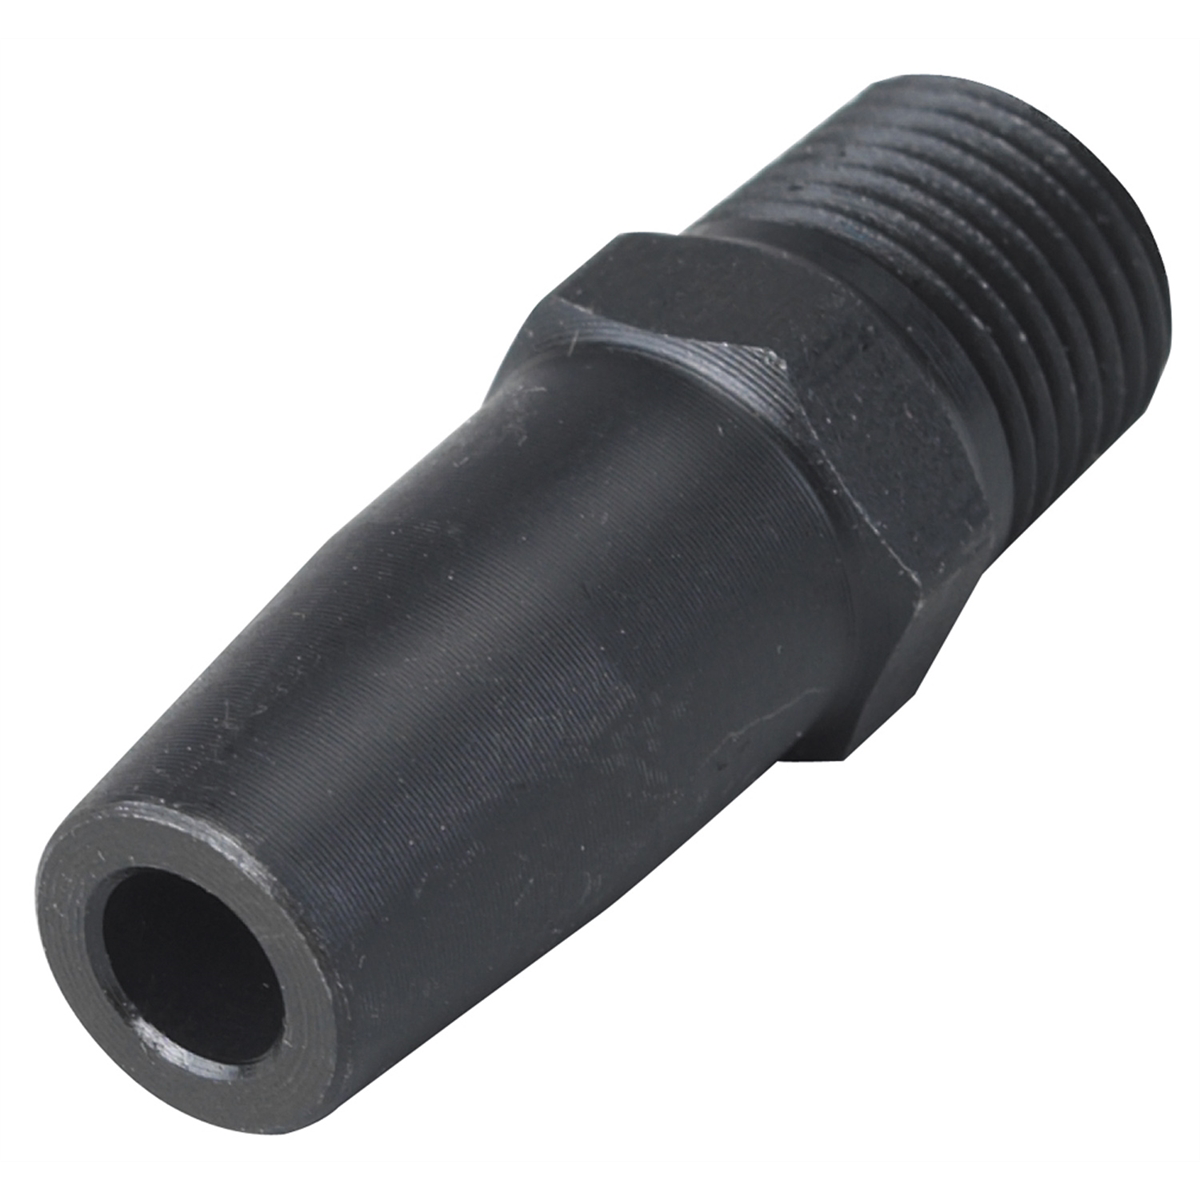 OTC TRANSMISSION FLUID FILL ADAPTER/FORD - image 1 of 3